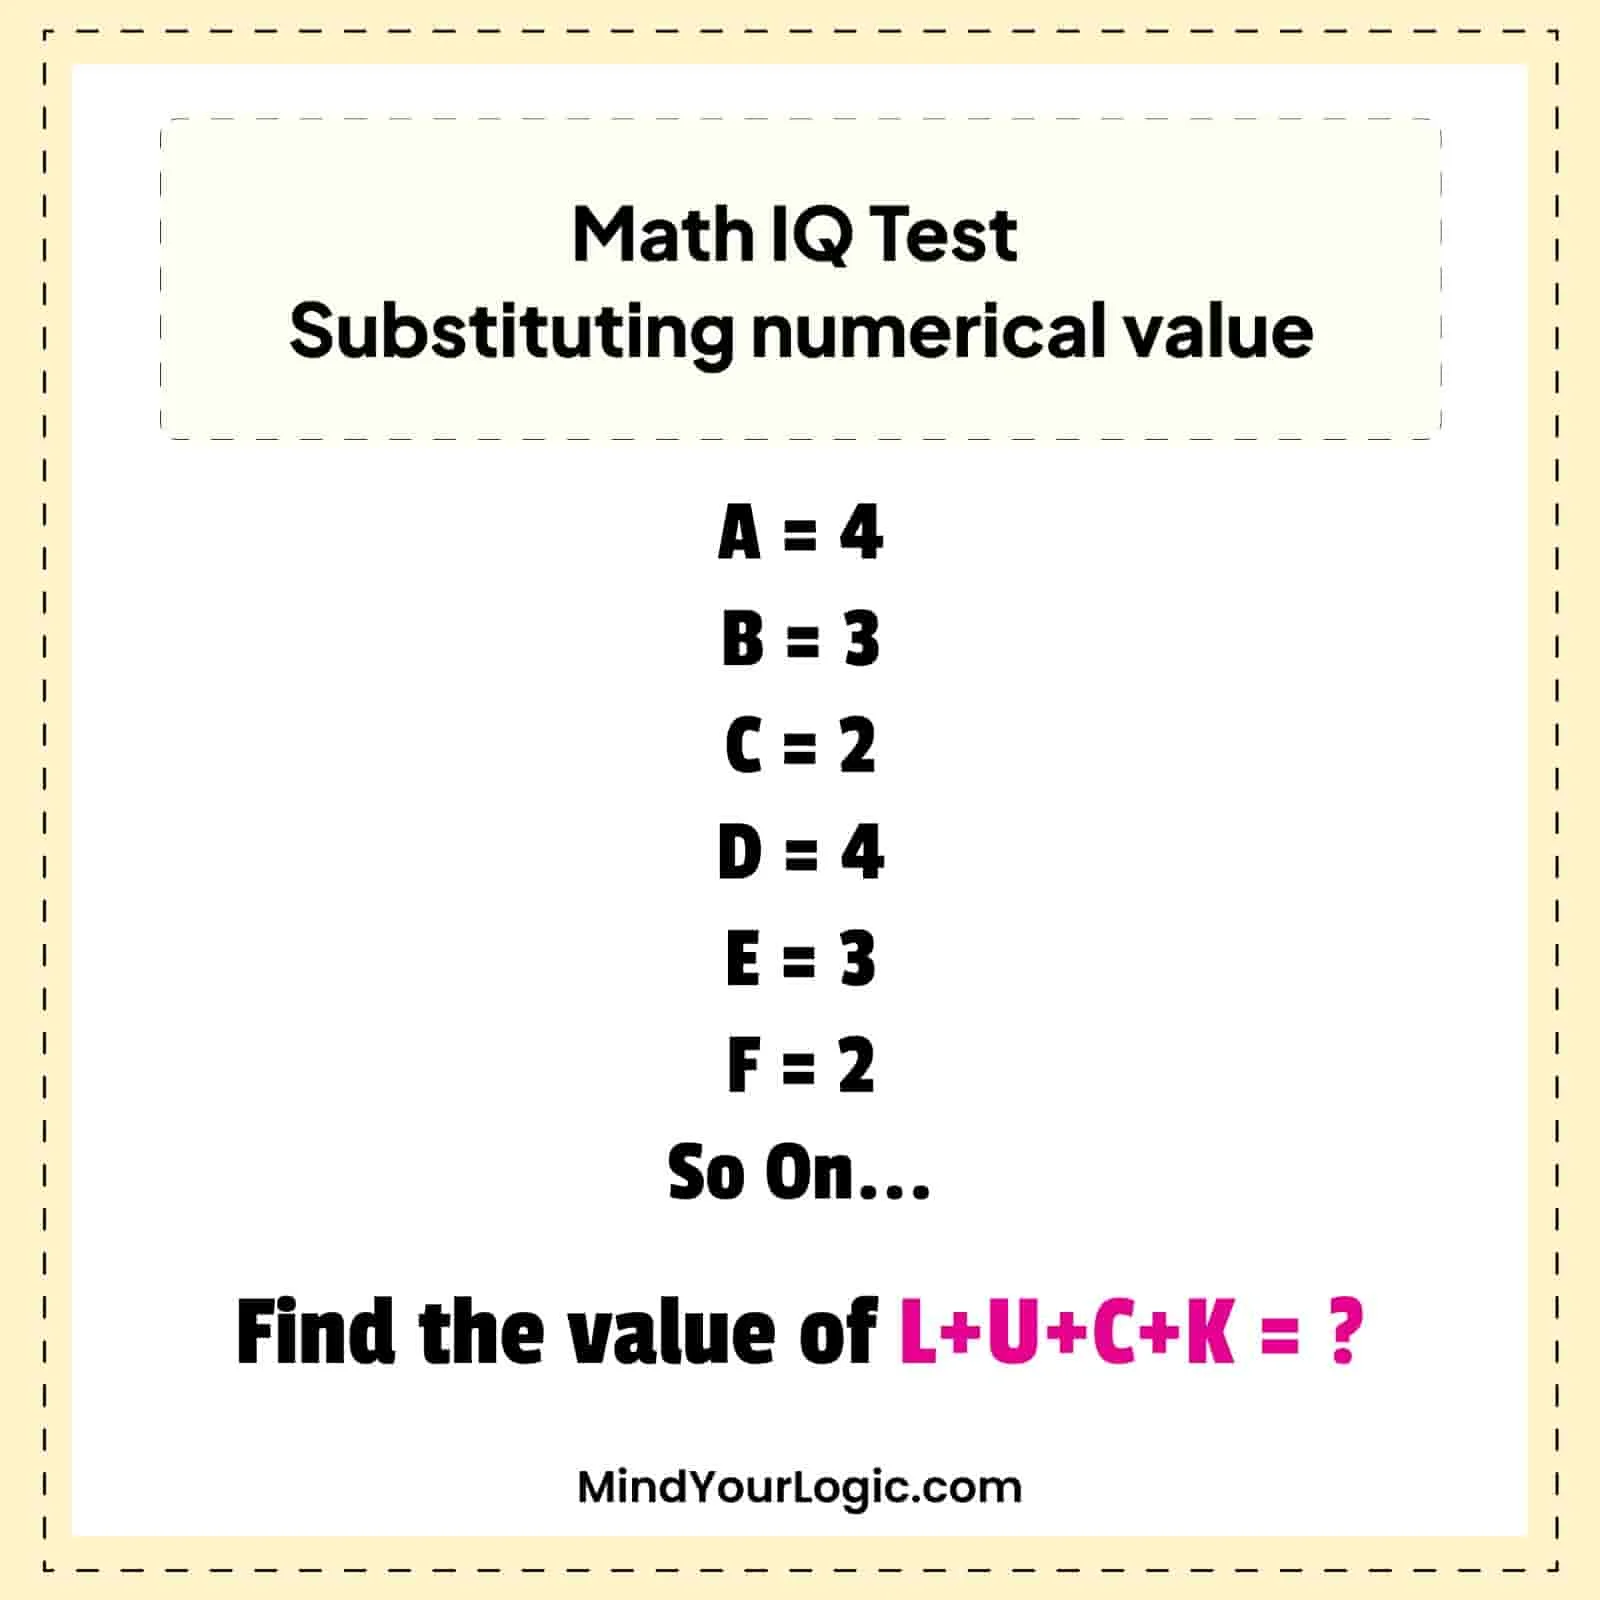 daily-math-challenge-a-is-substituted-by-4-B-by-3-C-by-2-find-the-value-of-word-LUCK